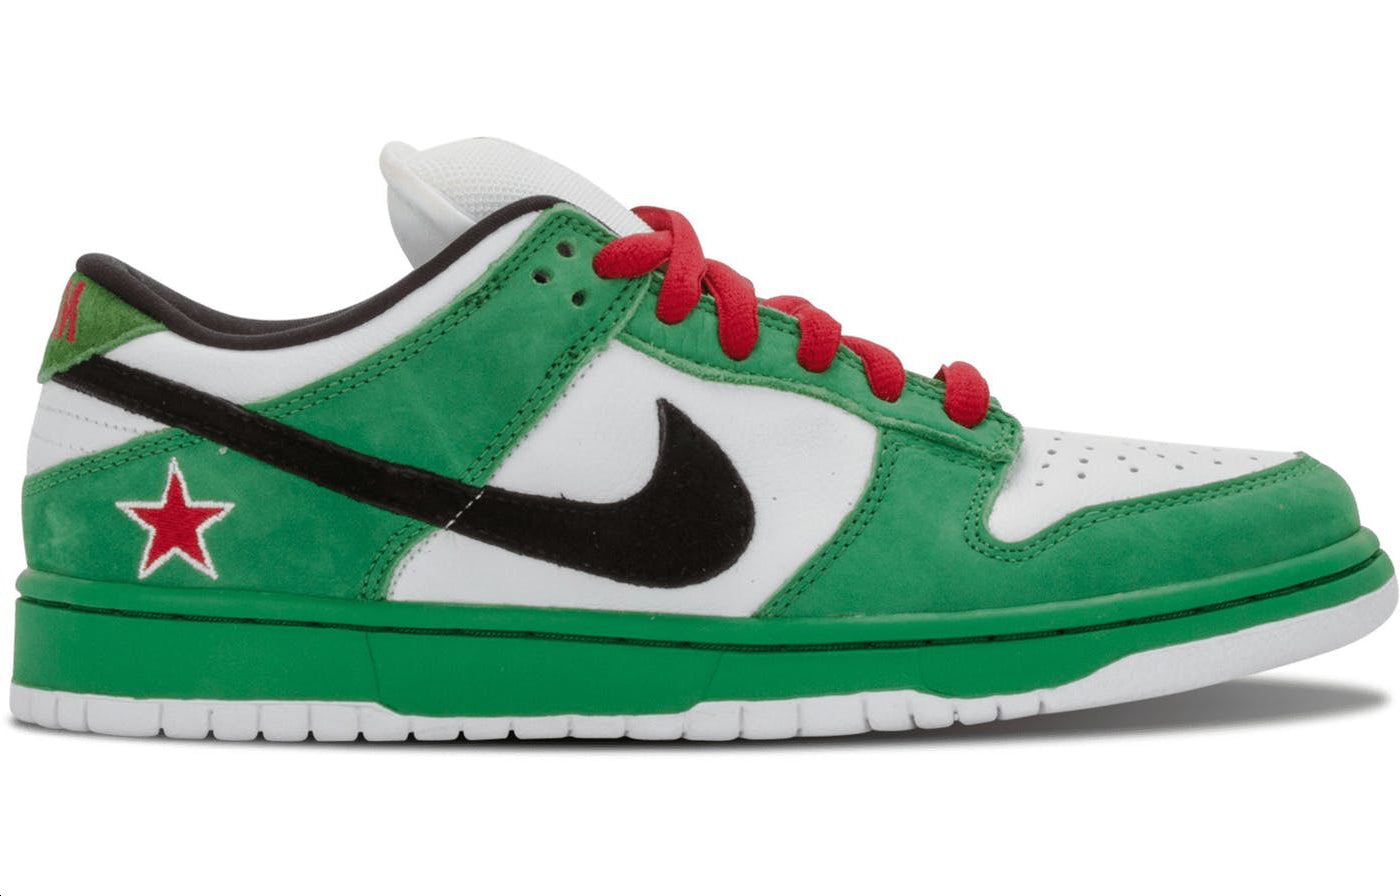 Nike Dunk Low Pro SB 'Heineken' 304292-302 Iconic Trainers - Click Image to Close